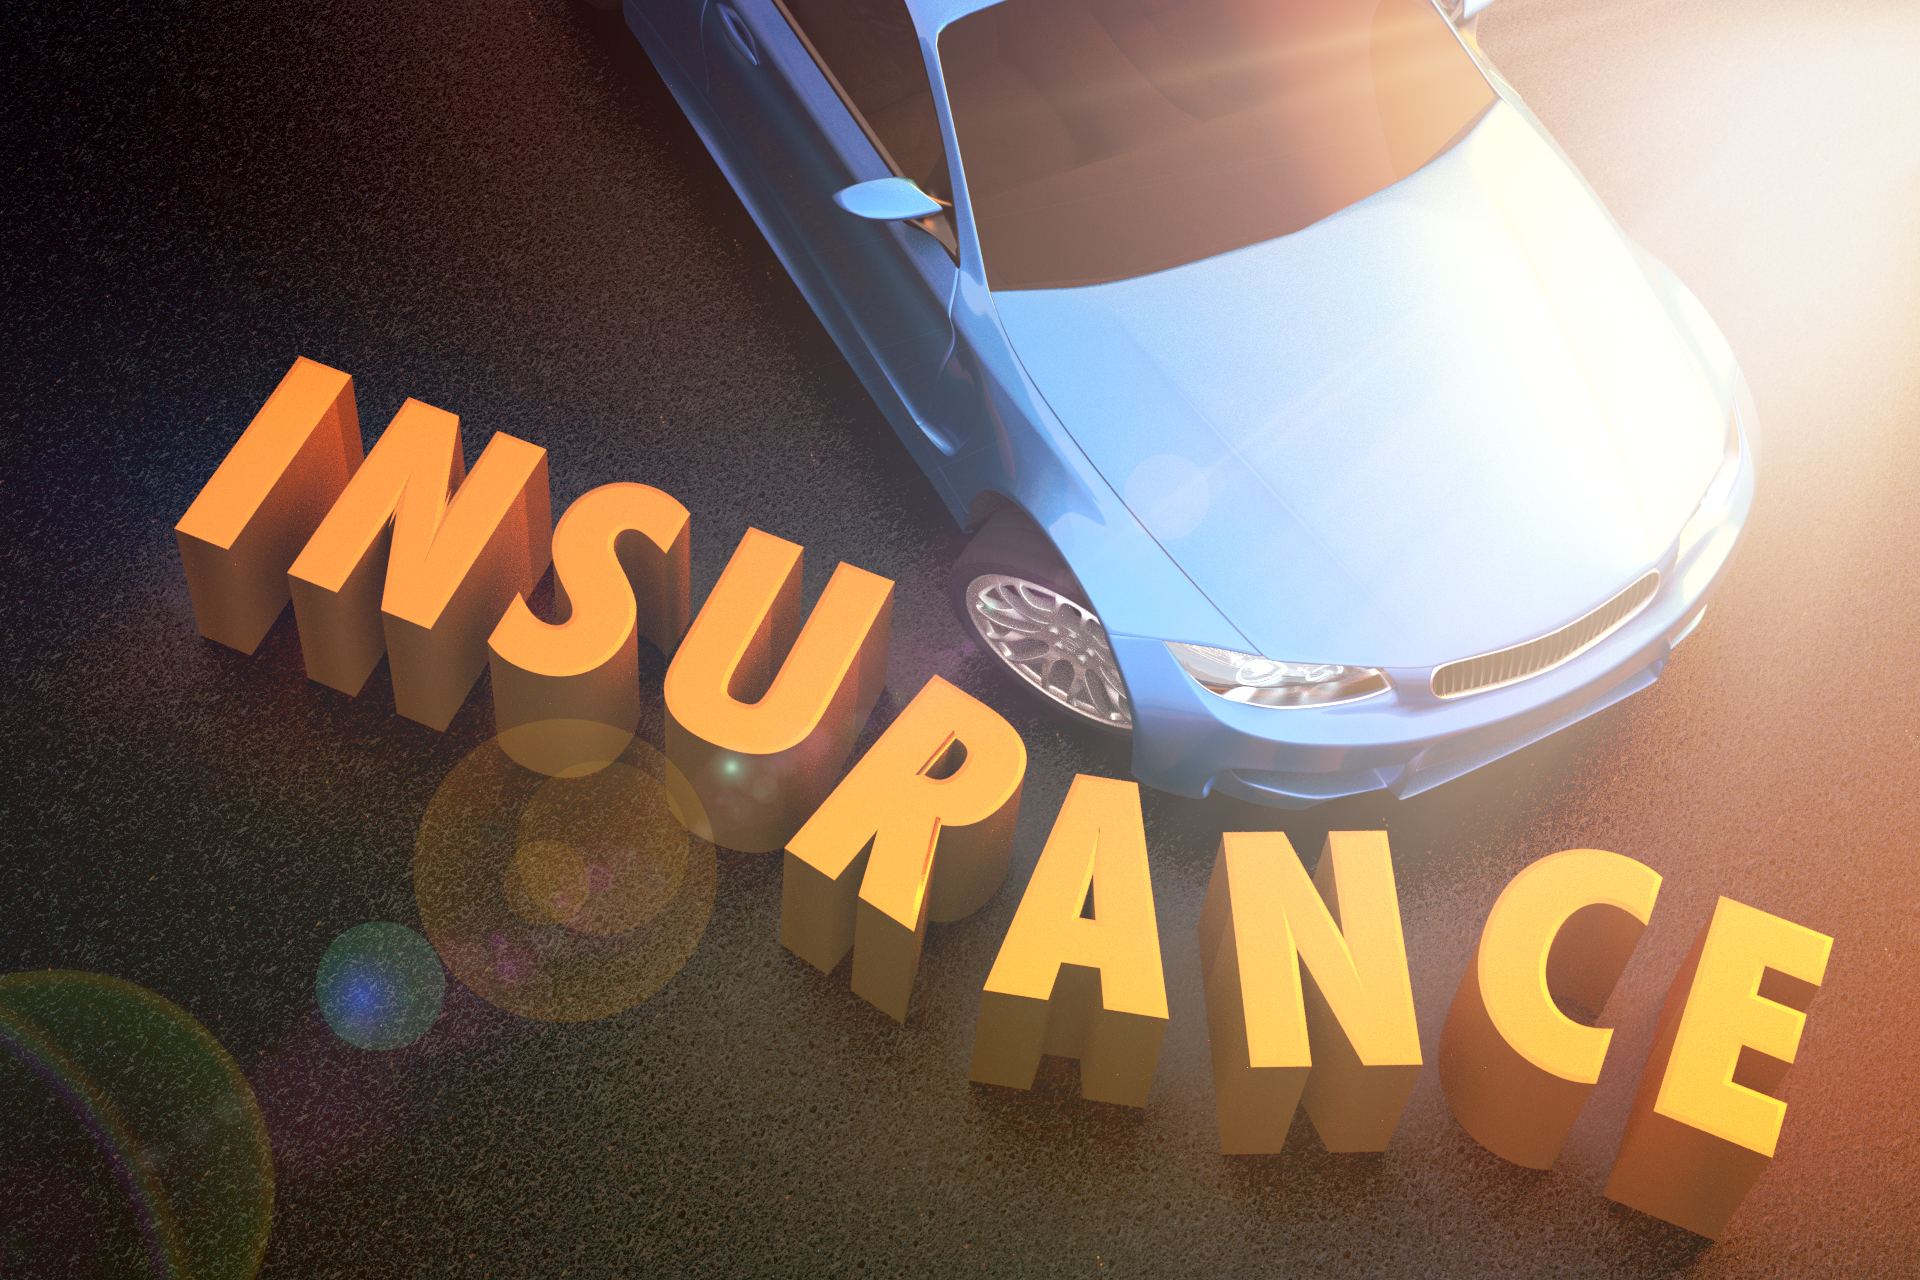 Car sliding into Insurance letters with flare free image download